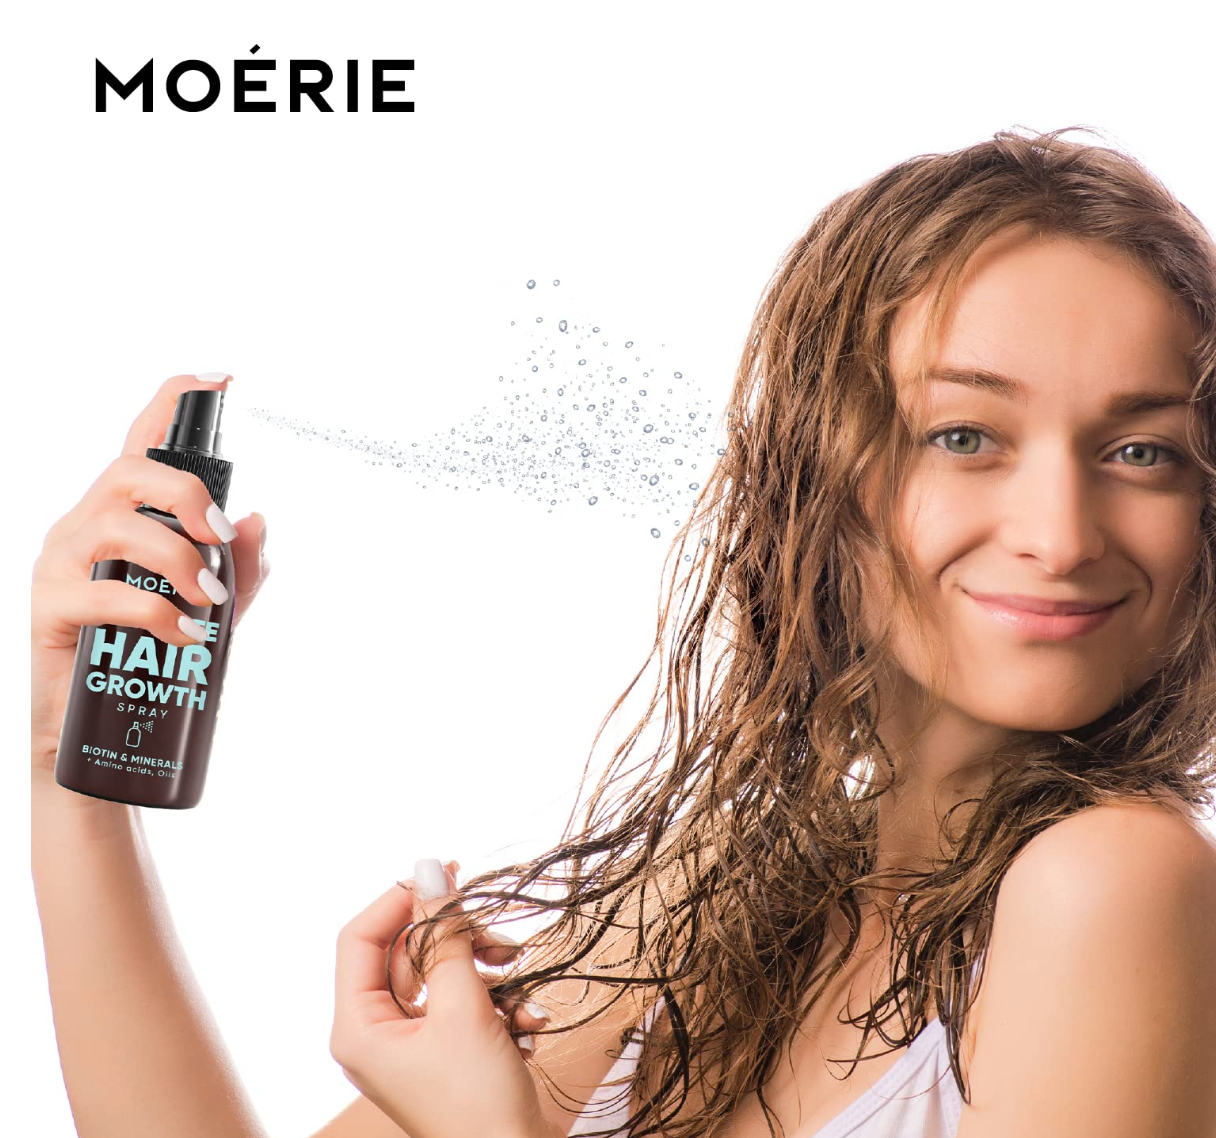 Moerie Ultimate Hair Growth Spray Designed to Strengthen Hair & Stop Hair Loss - 100% Natural Hair Serum for Hair Growth with over 100 Minerals, Vitamins & Amino acids - Fresh Scent - 5.07 Fl. Oz